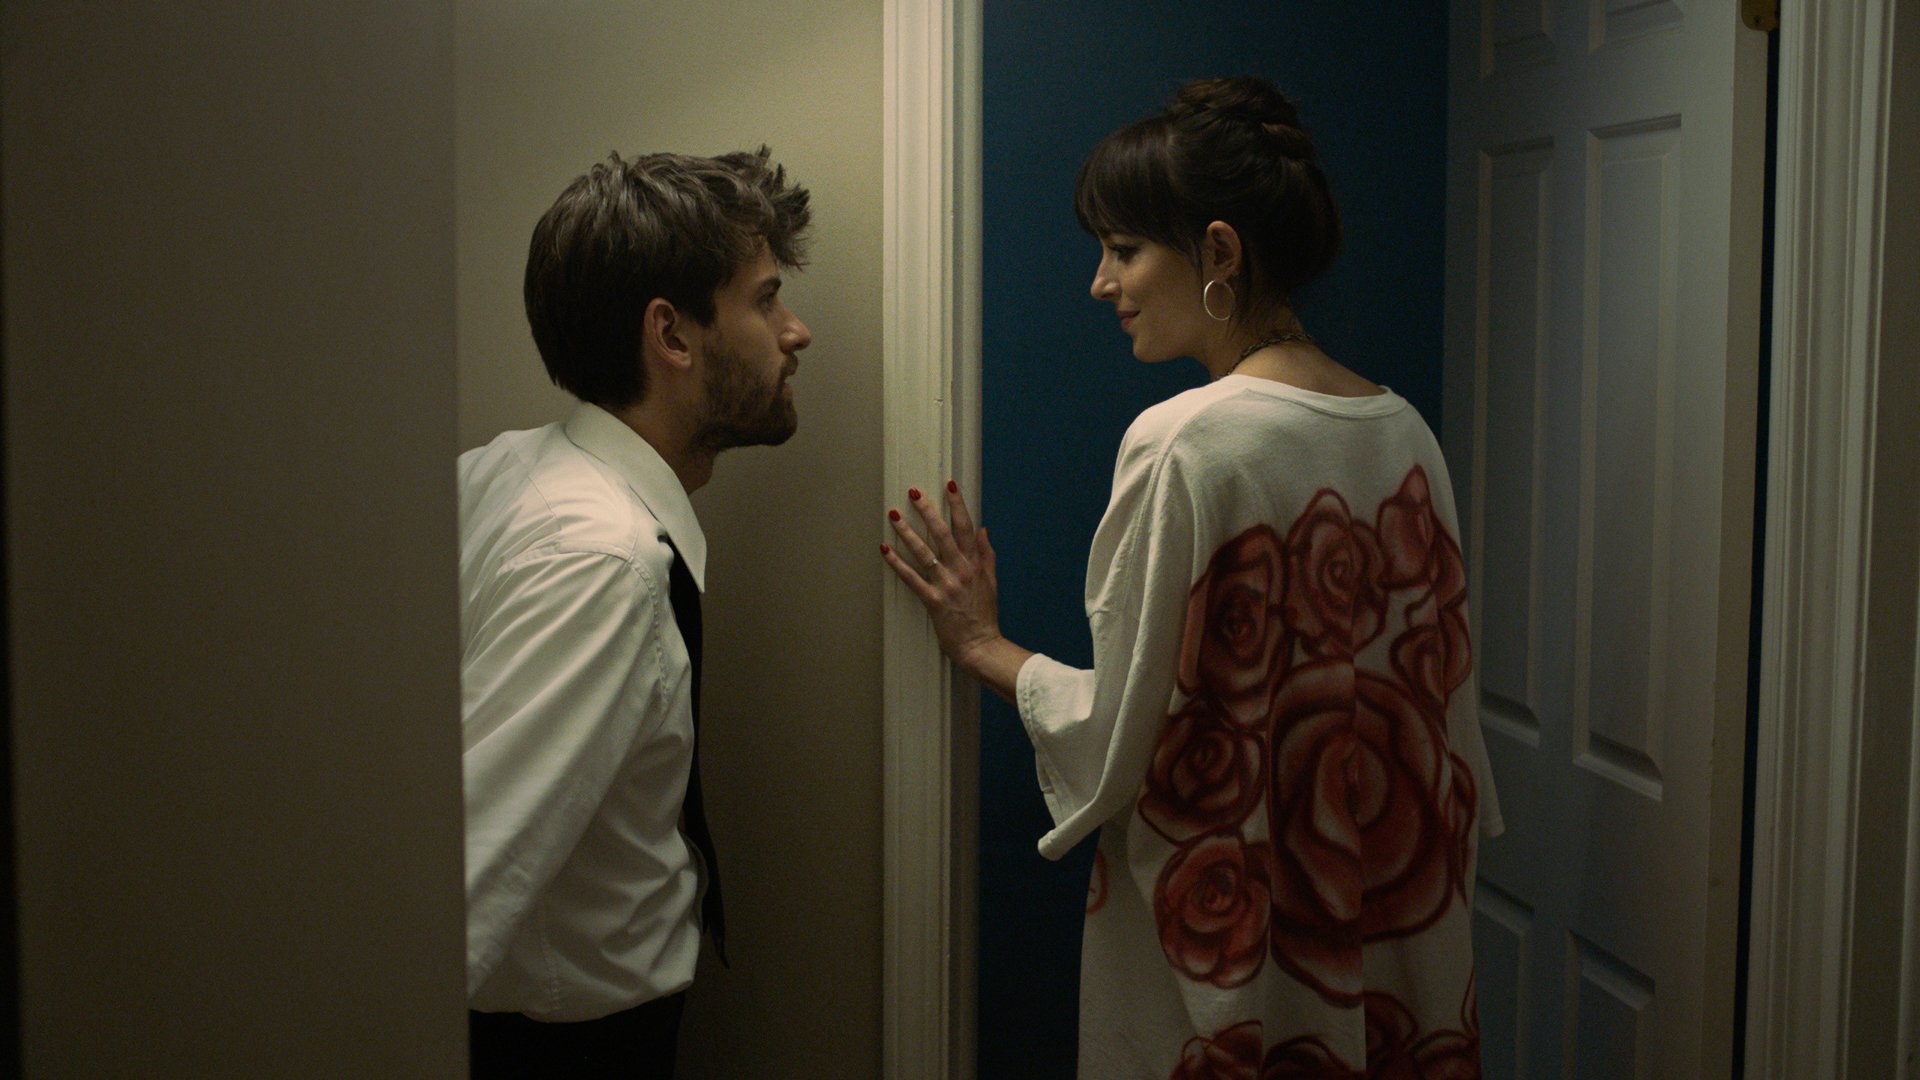 Two people in a hallway looking at each other.